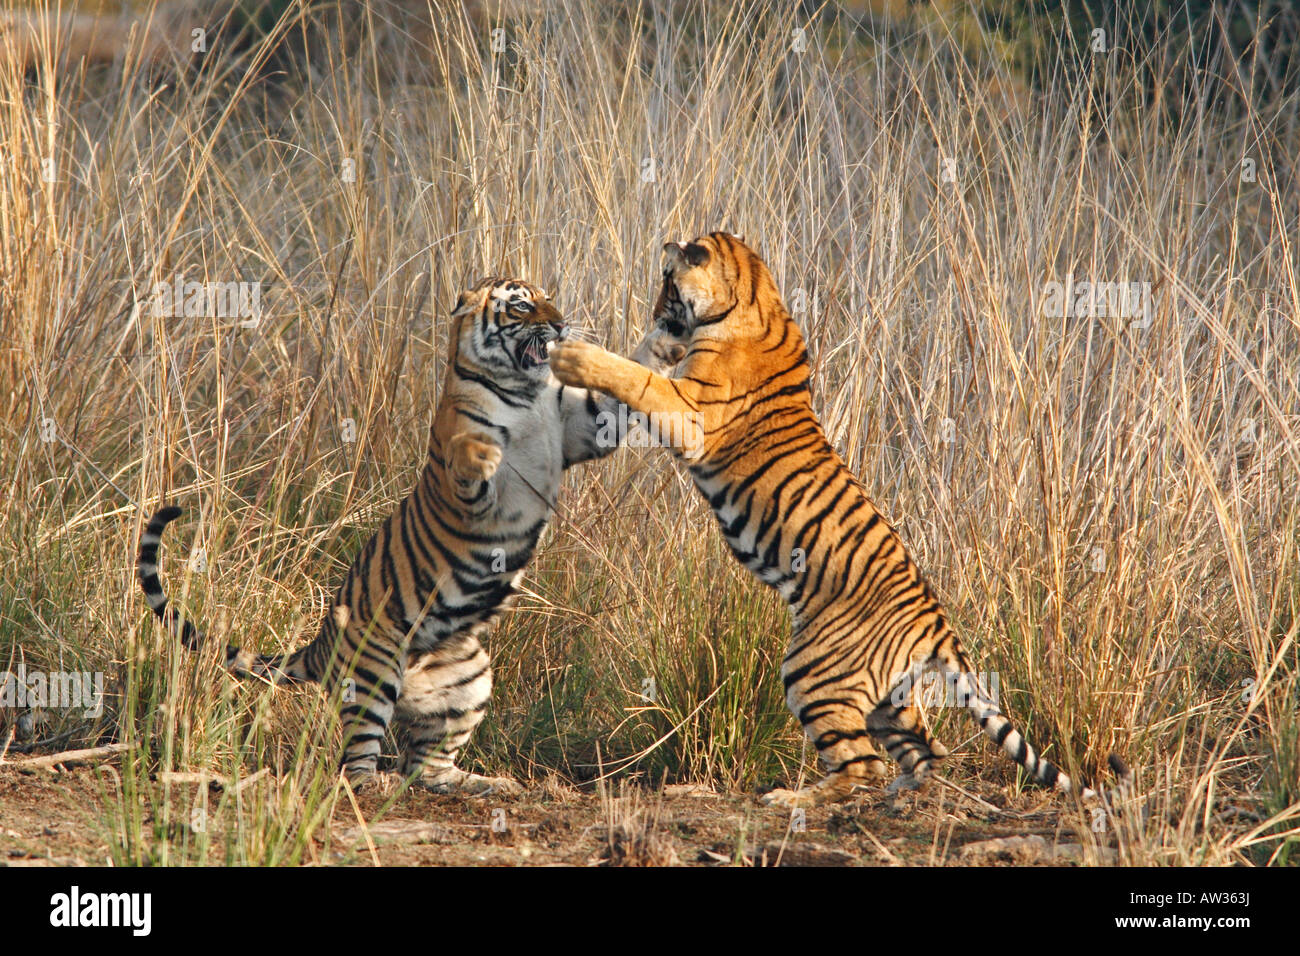 Fighting Royal Bengal Tigers Stock Photo